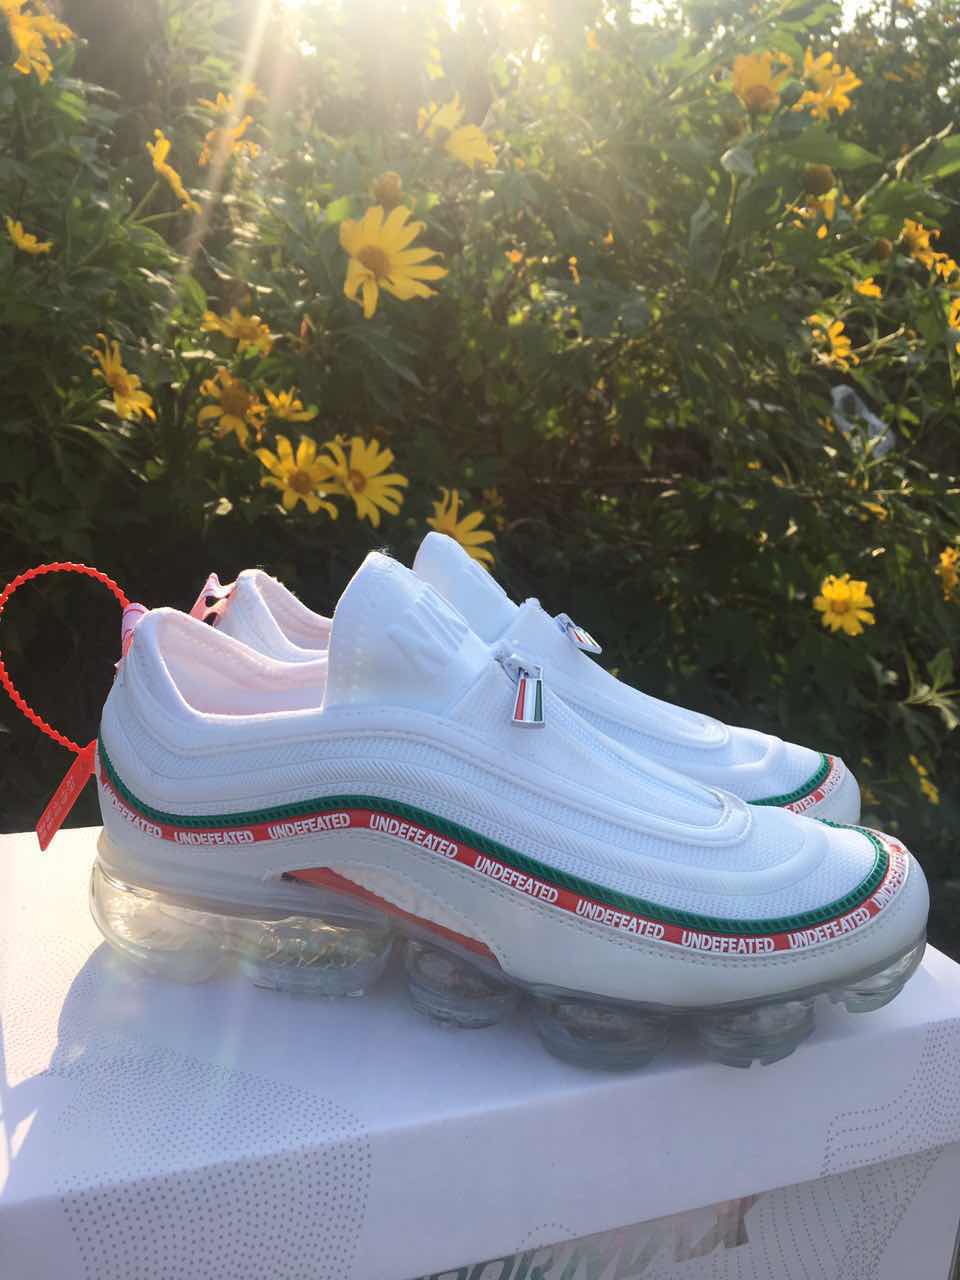 Nike Air Max 97 Bullet White Red Zipper Shoes